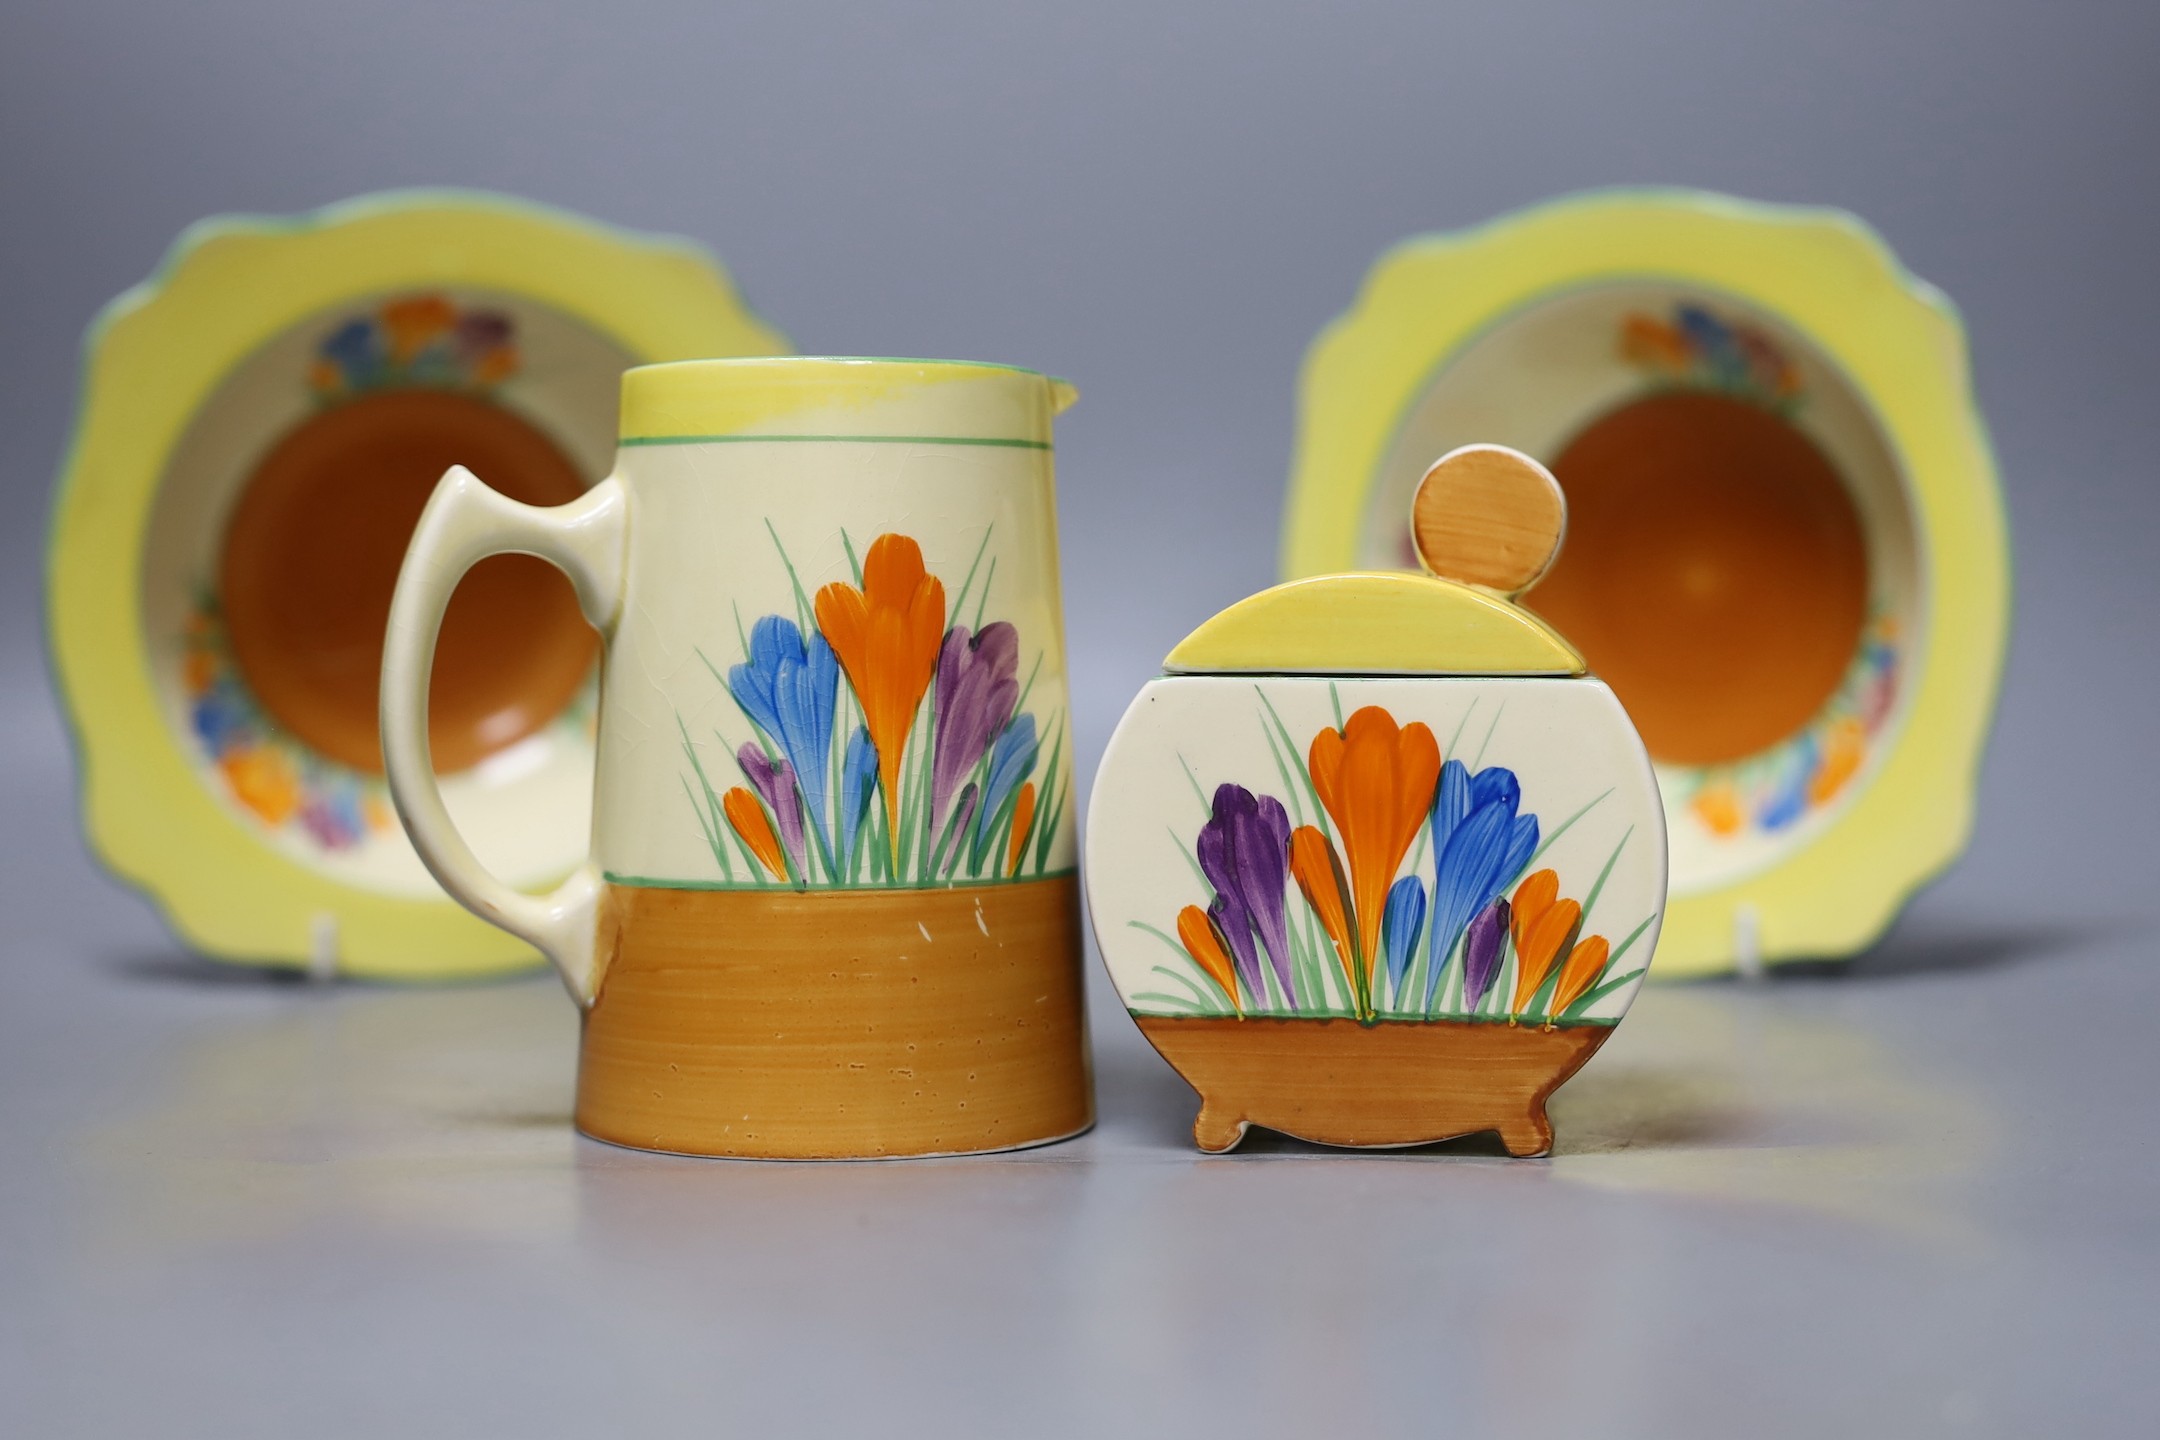 A Clarice Cliff crocus jug, 2 dishes and a jam pot and cover